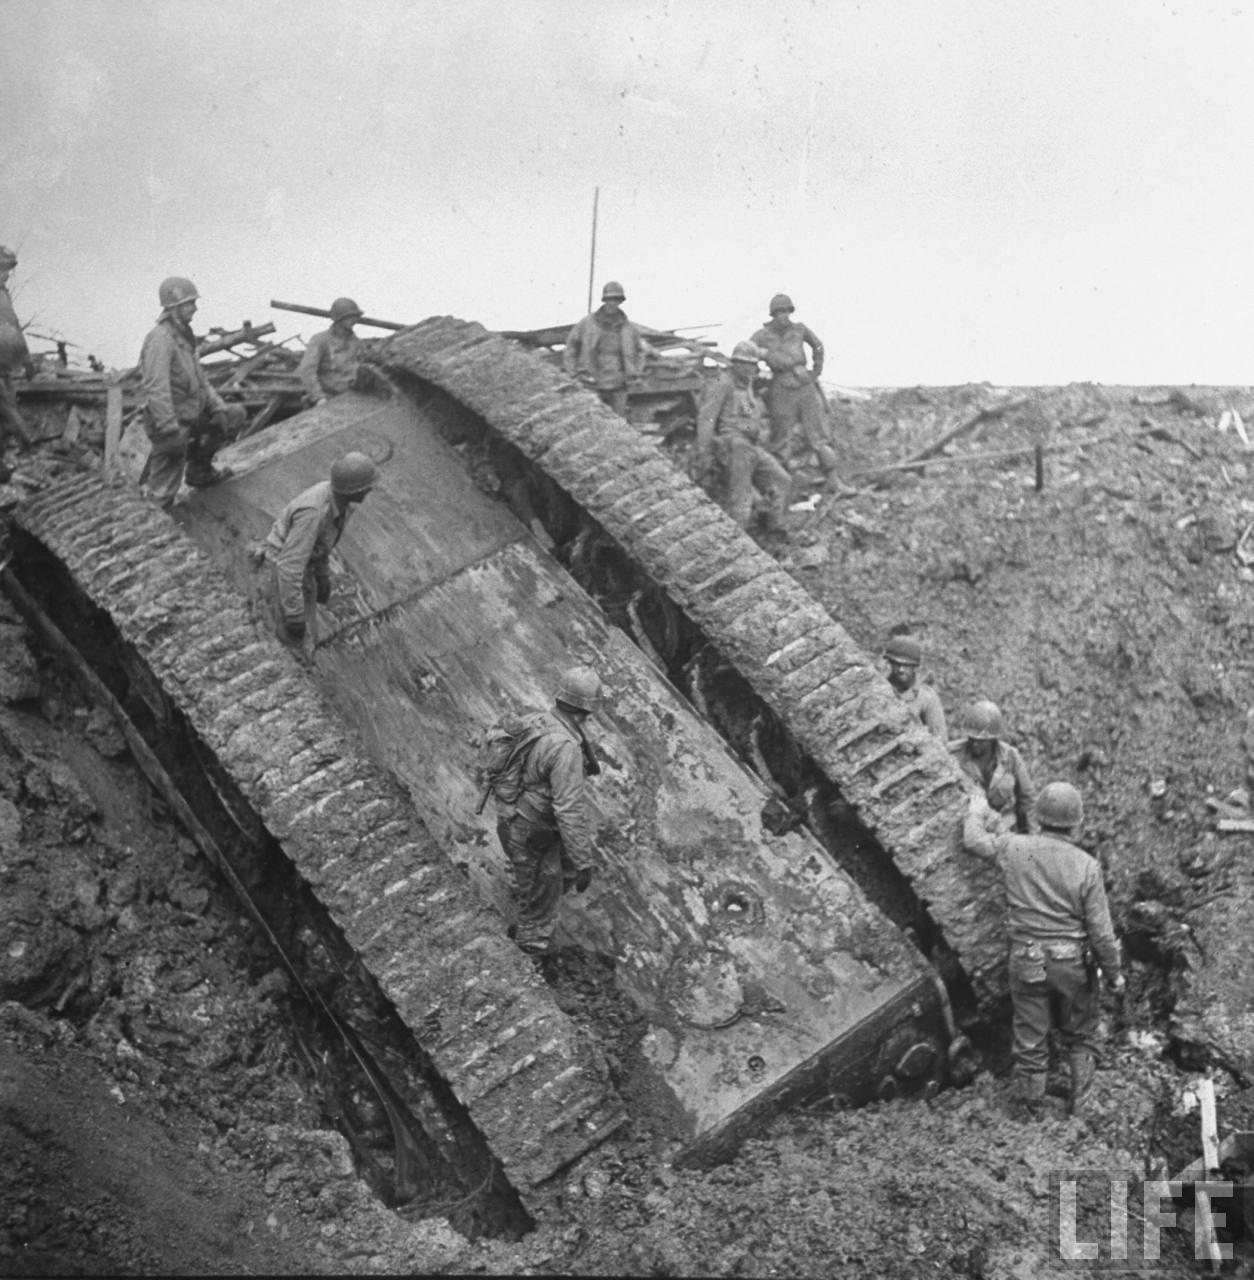 Panzer overturned by air attack. Dec 1944. (Life)